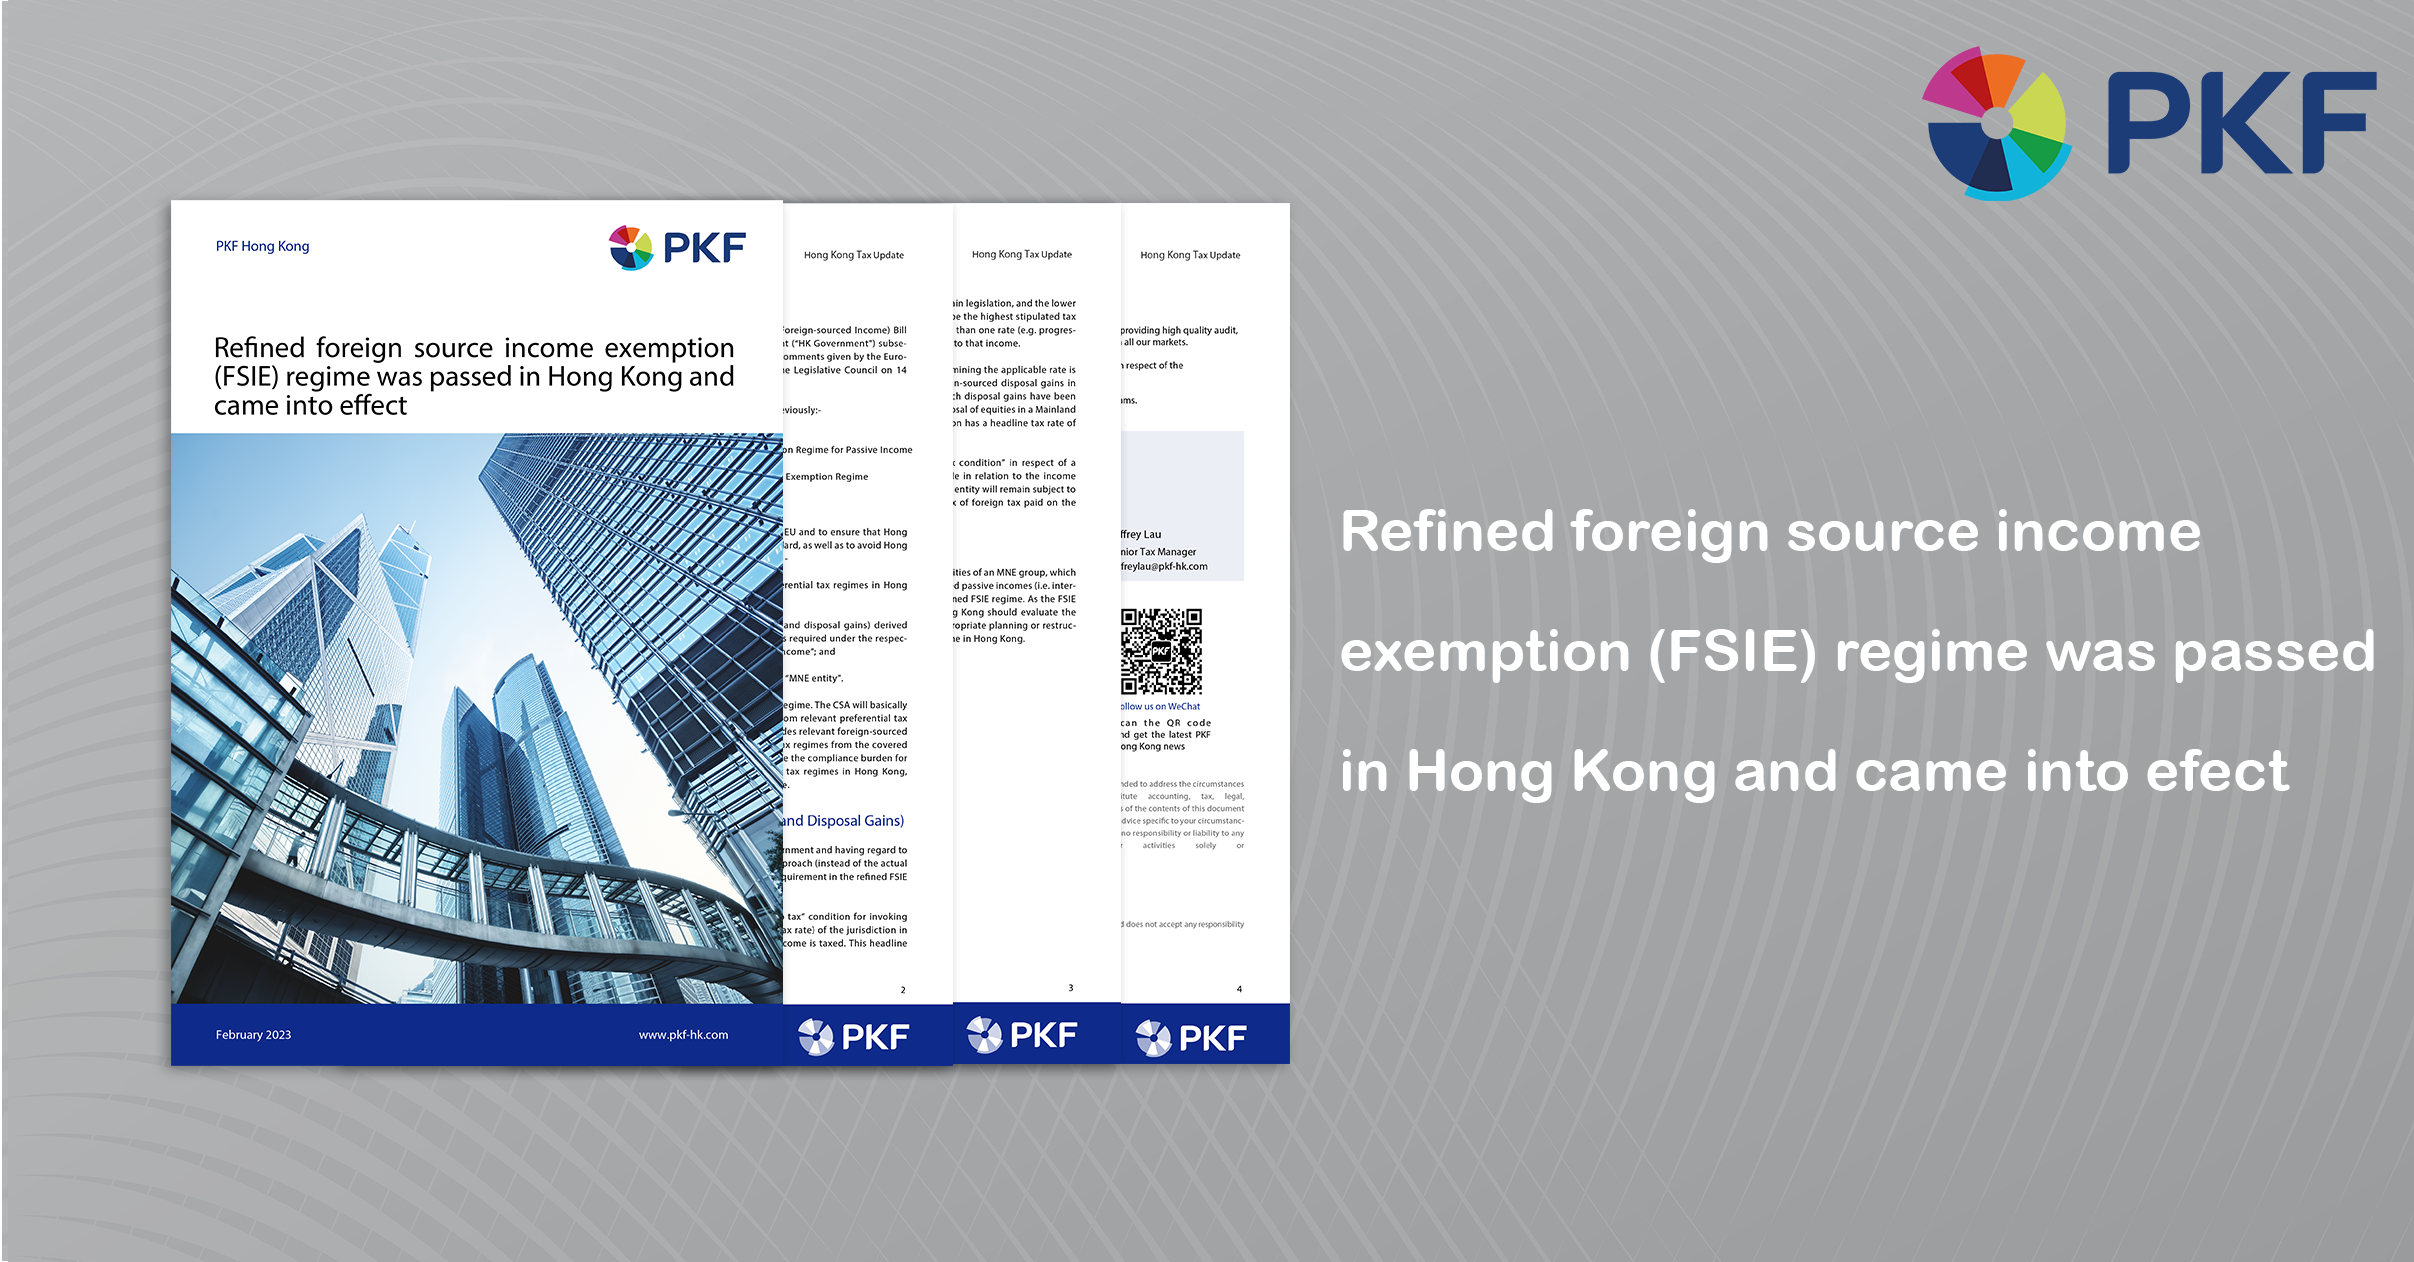 Refined foreign source income exemption (FSIE) regime was passed in Hong Kong and came into effect